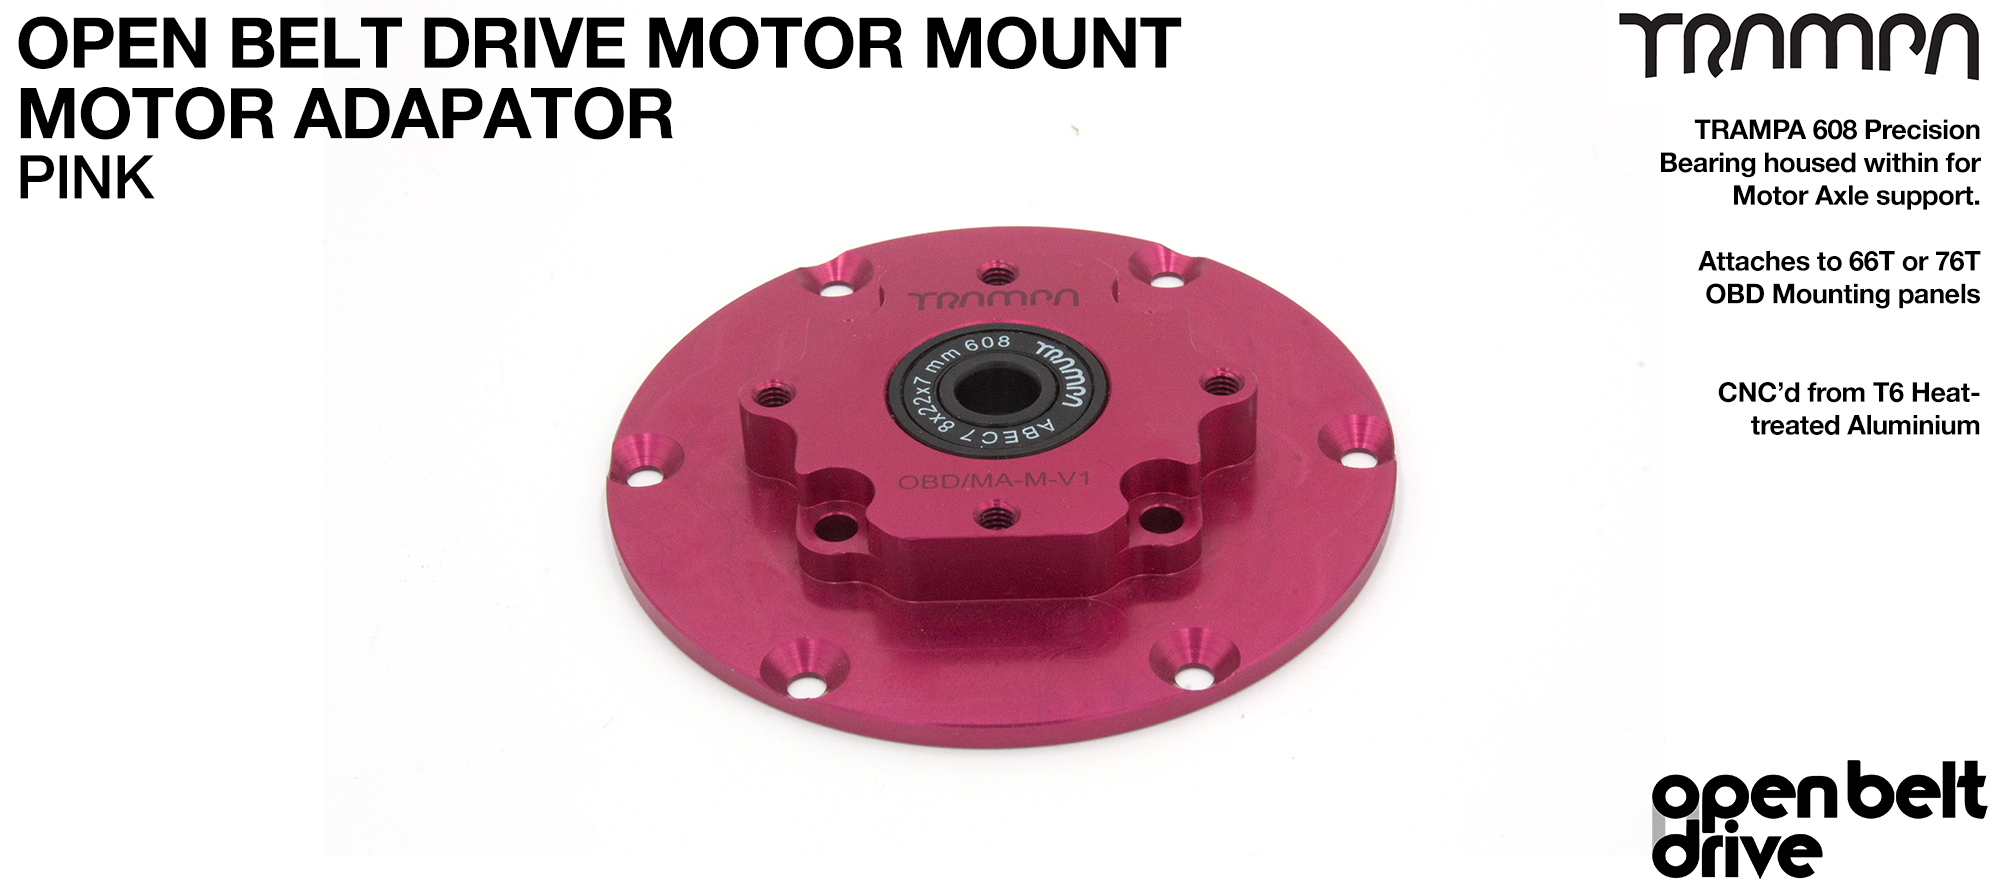 OBD Motor Adaptor with Housed Bearing - PINK